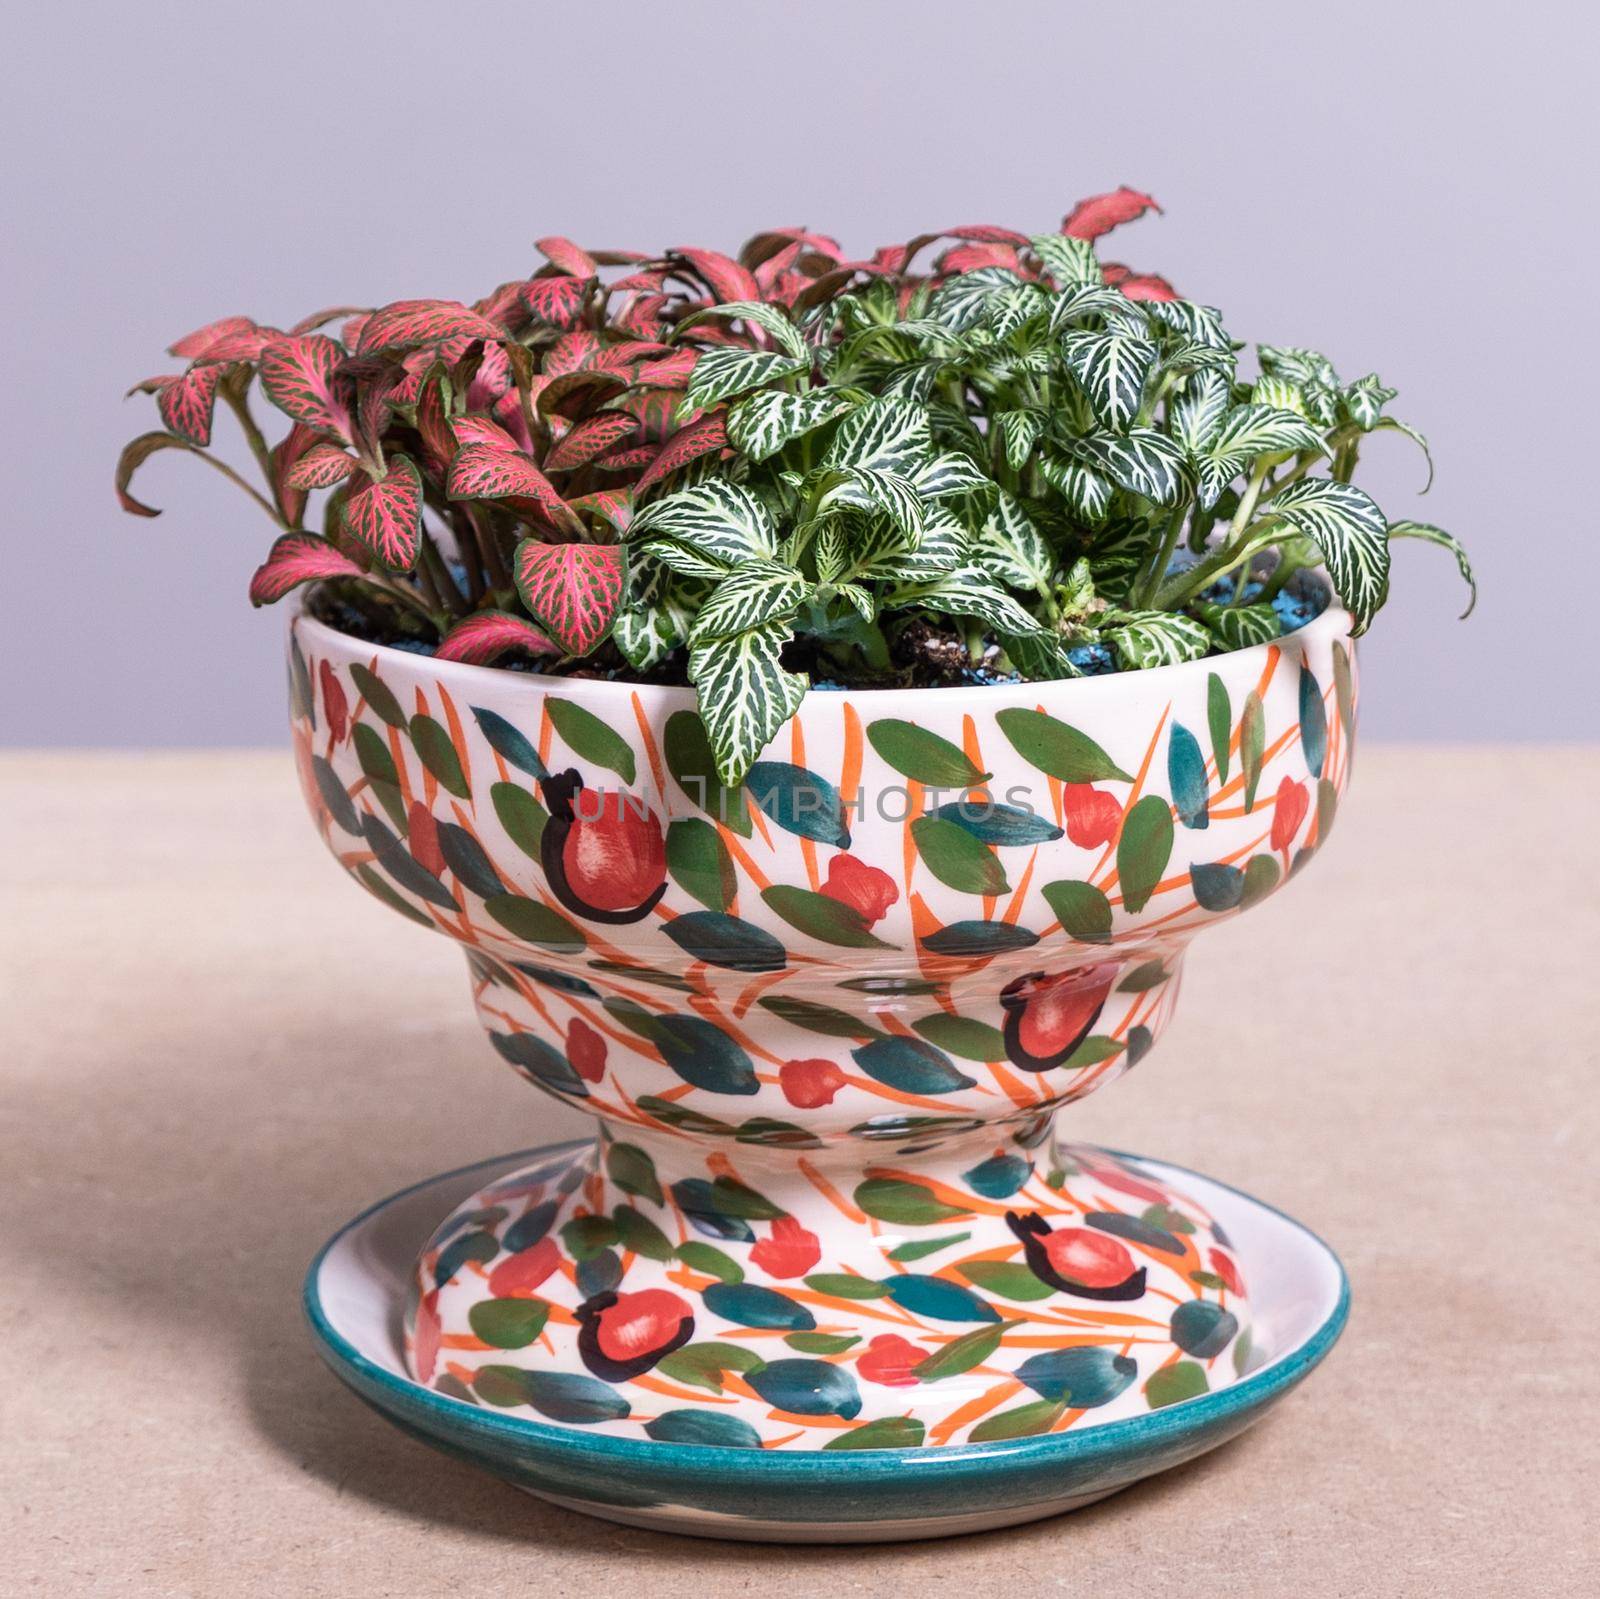 Painted-leaf begonia in the decorative ceramic pot by ferhad